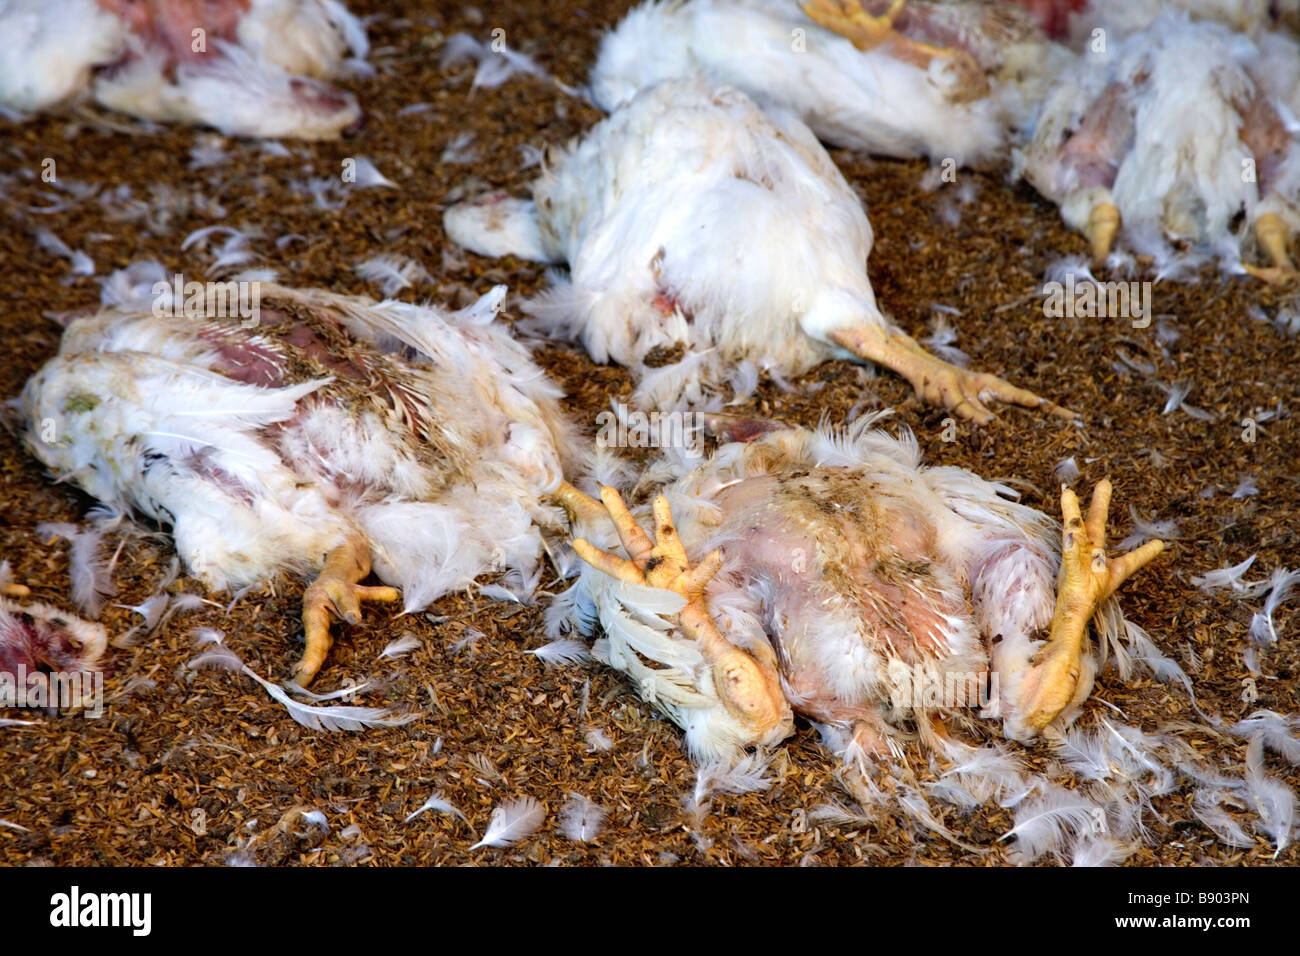 Deceased chickens at poultry farm. Stock Photo